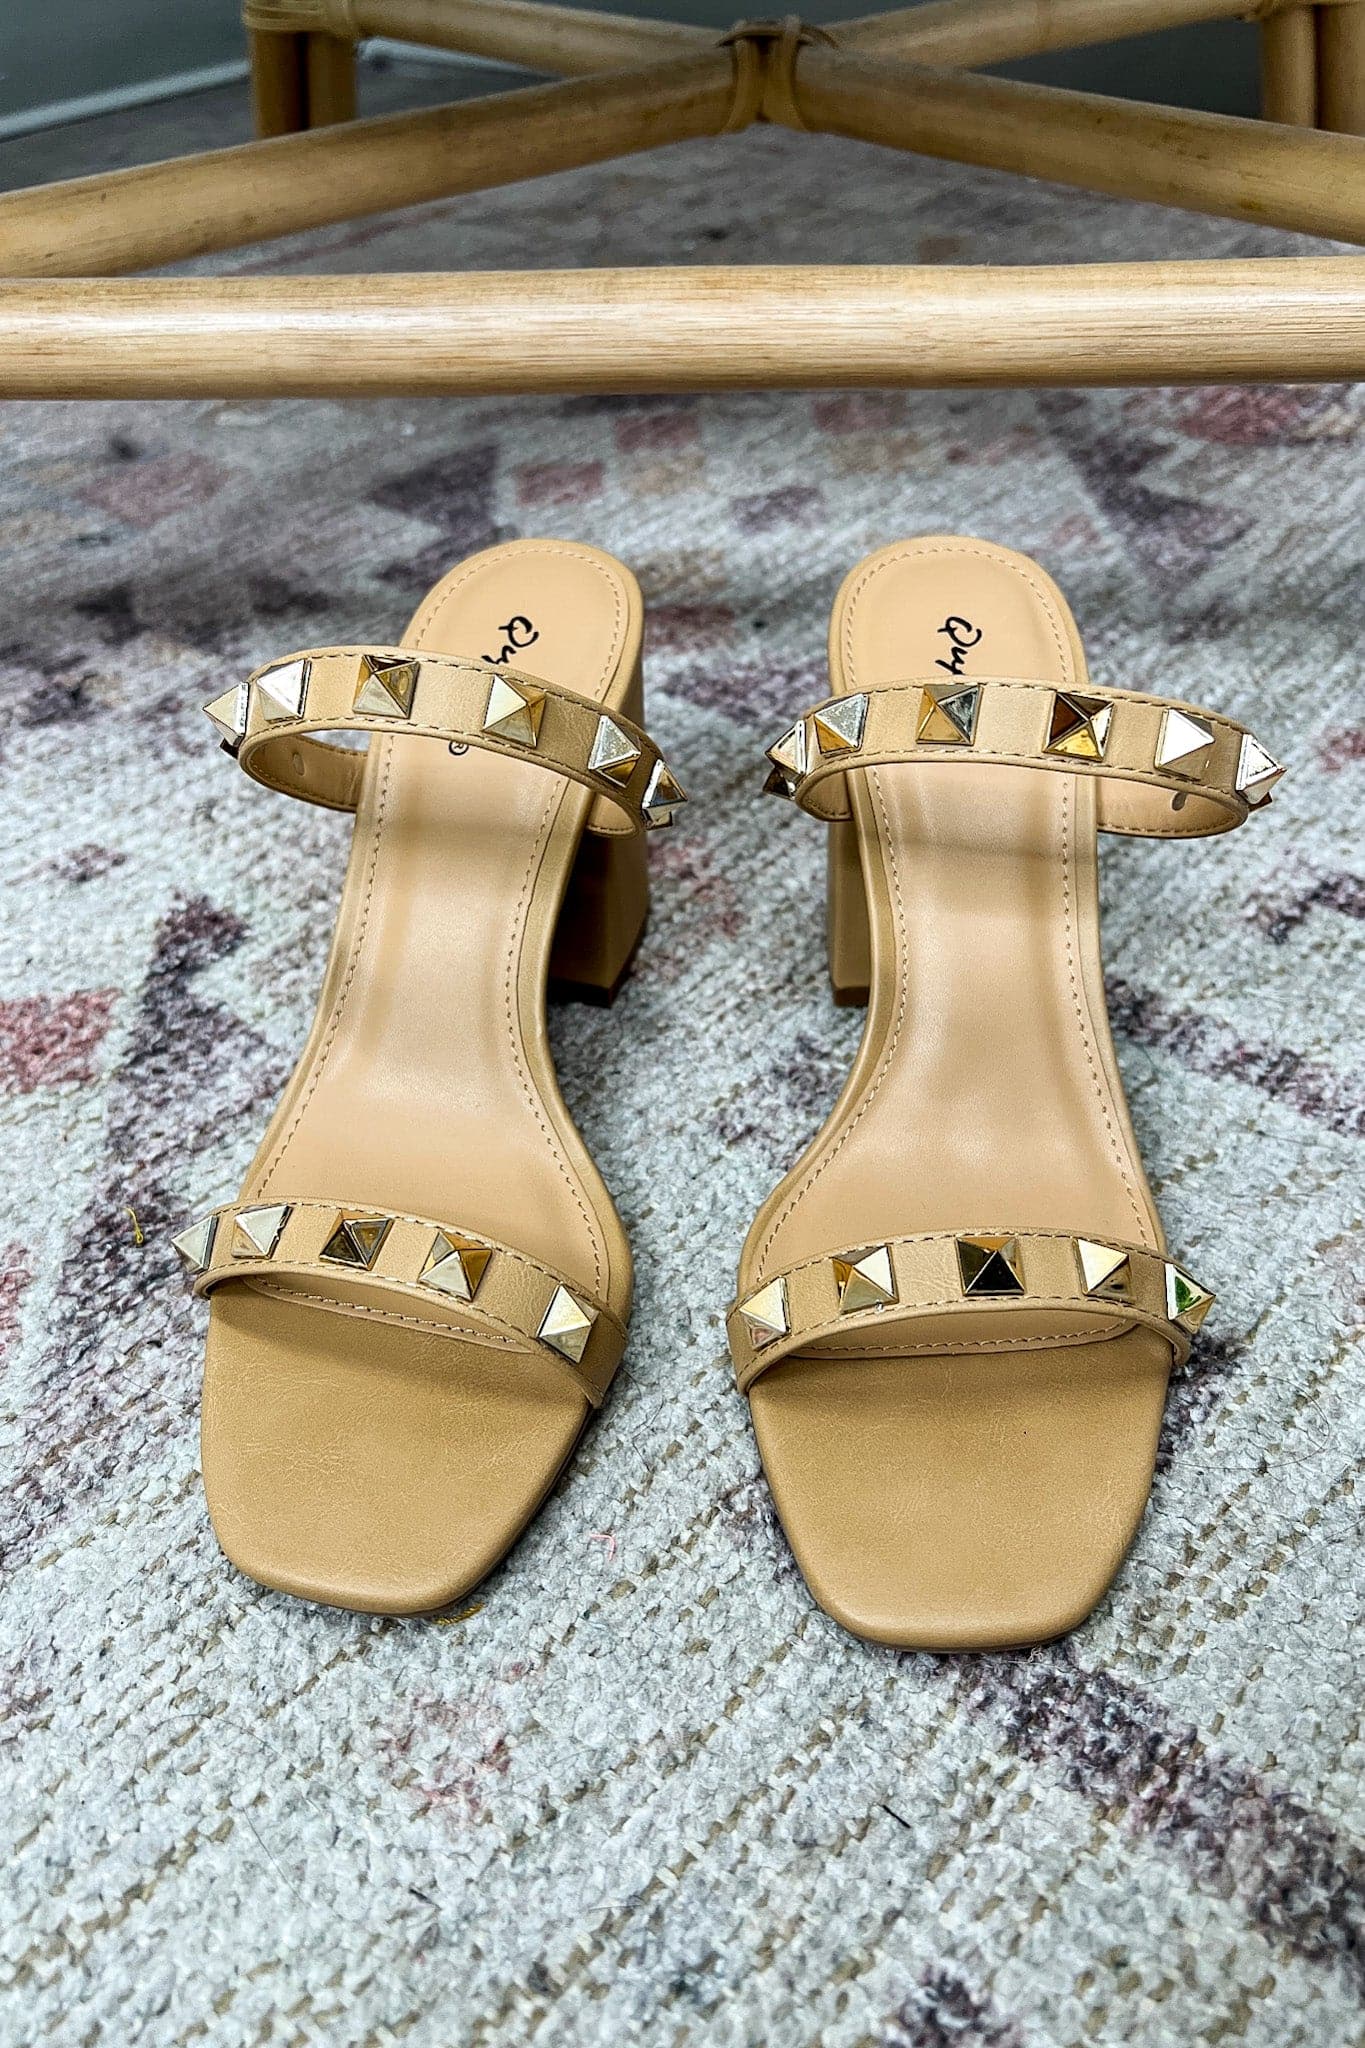  New Ambition Studded Strappy Heels - FINAL SALE - Madison and Mallory